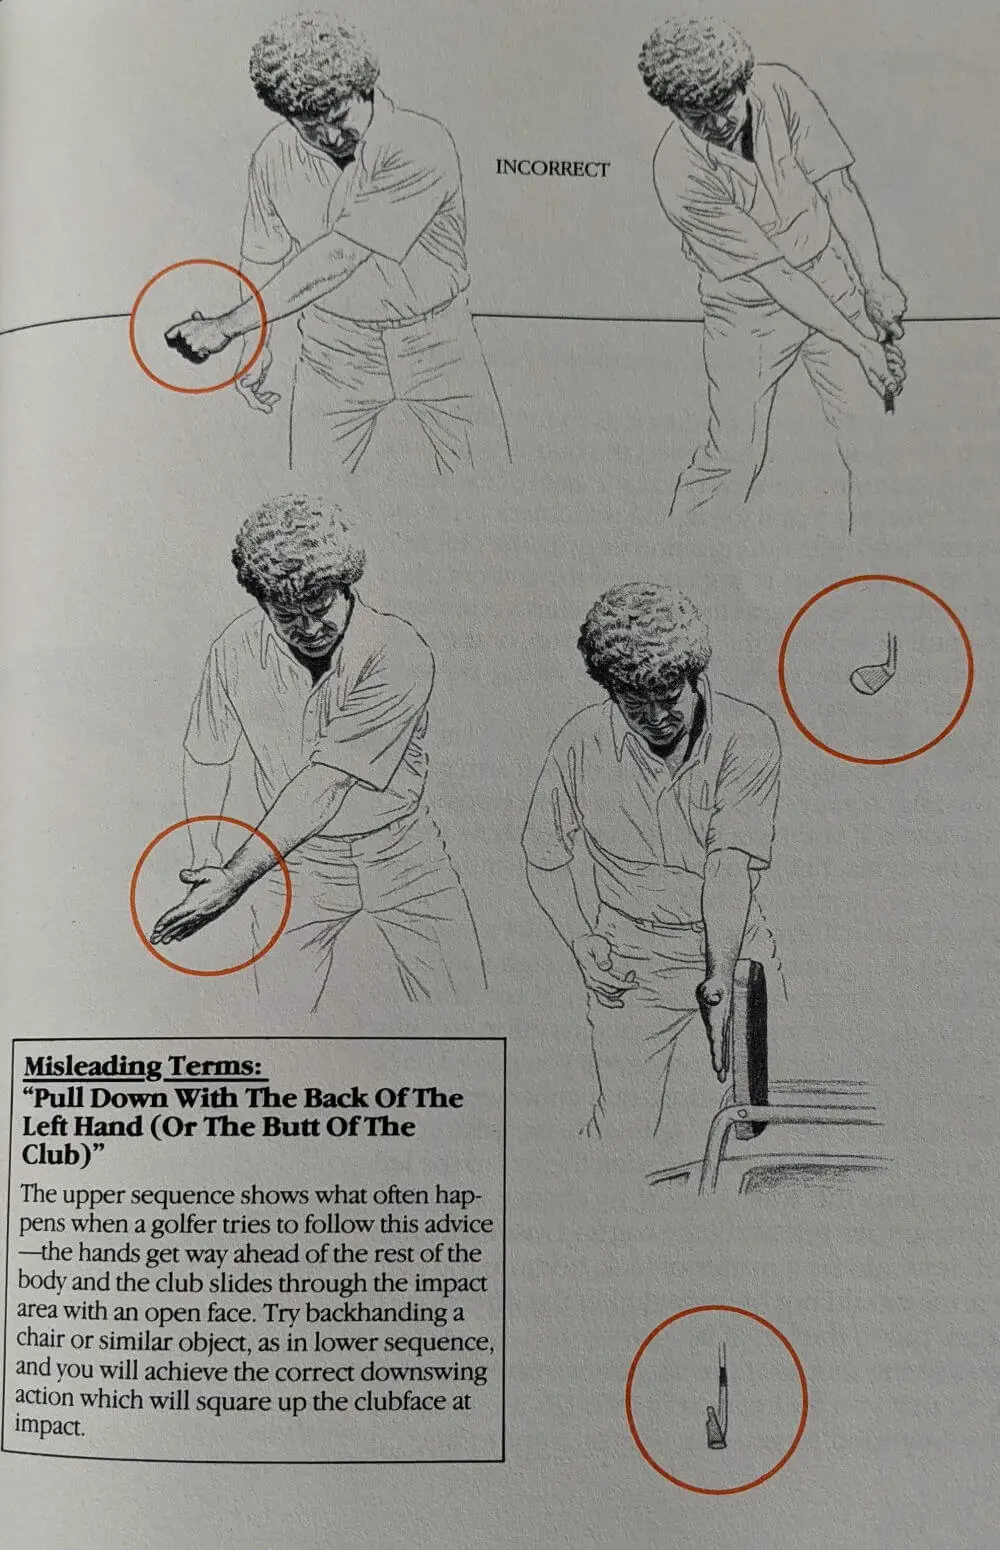 Misleading Term - Pull Down with the Back of the Left Hand